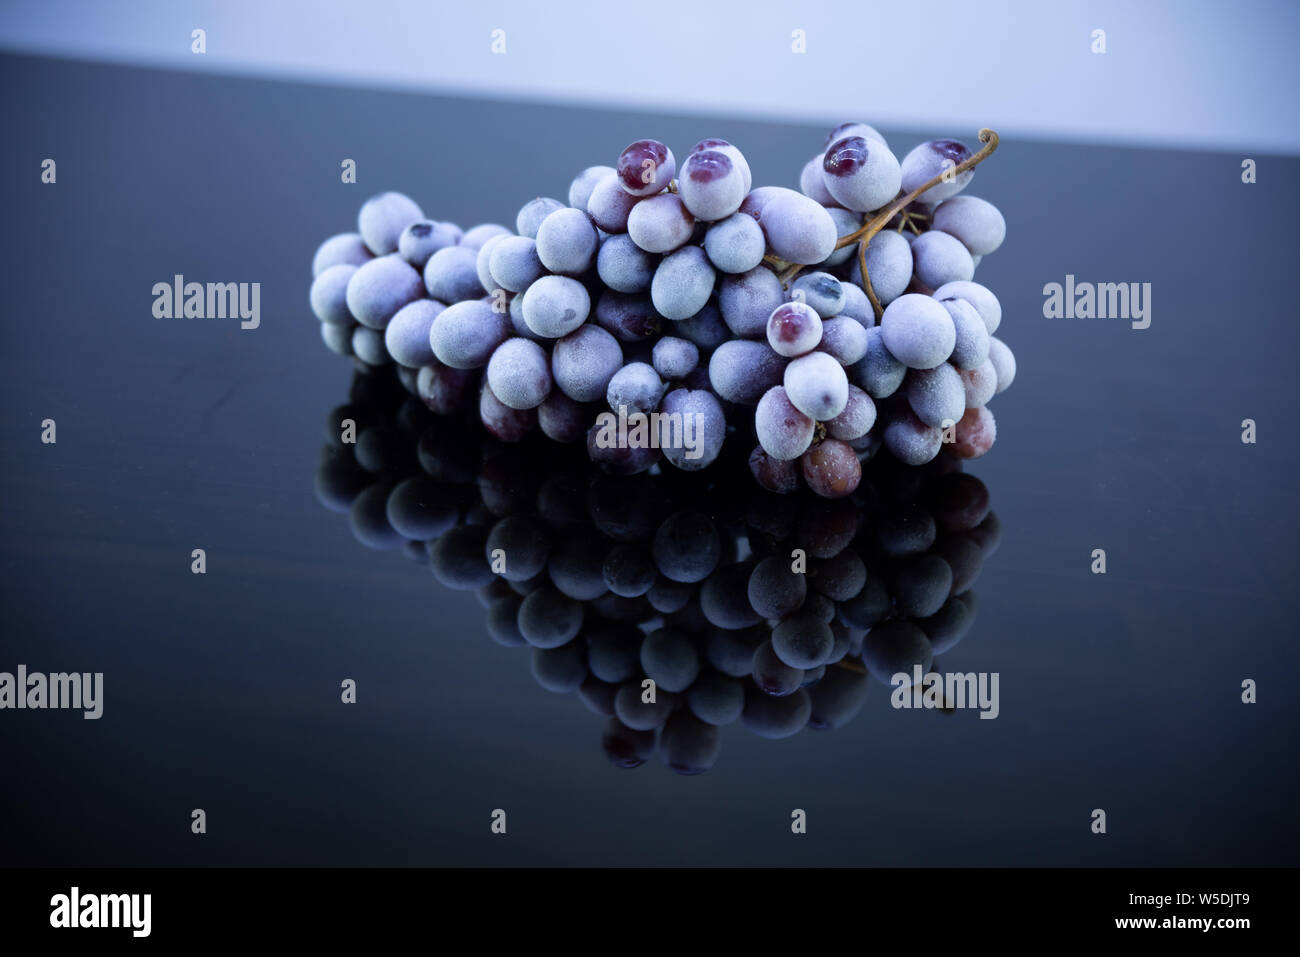 Feel cold with frozen Grapes Stock Photo